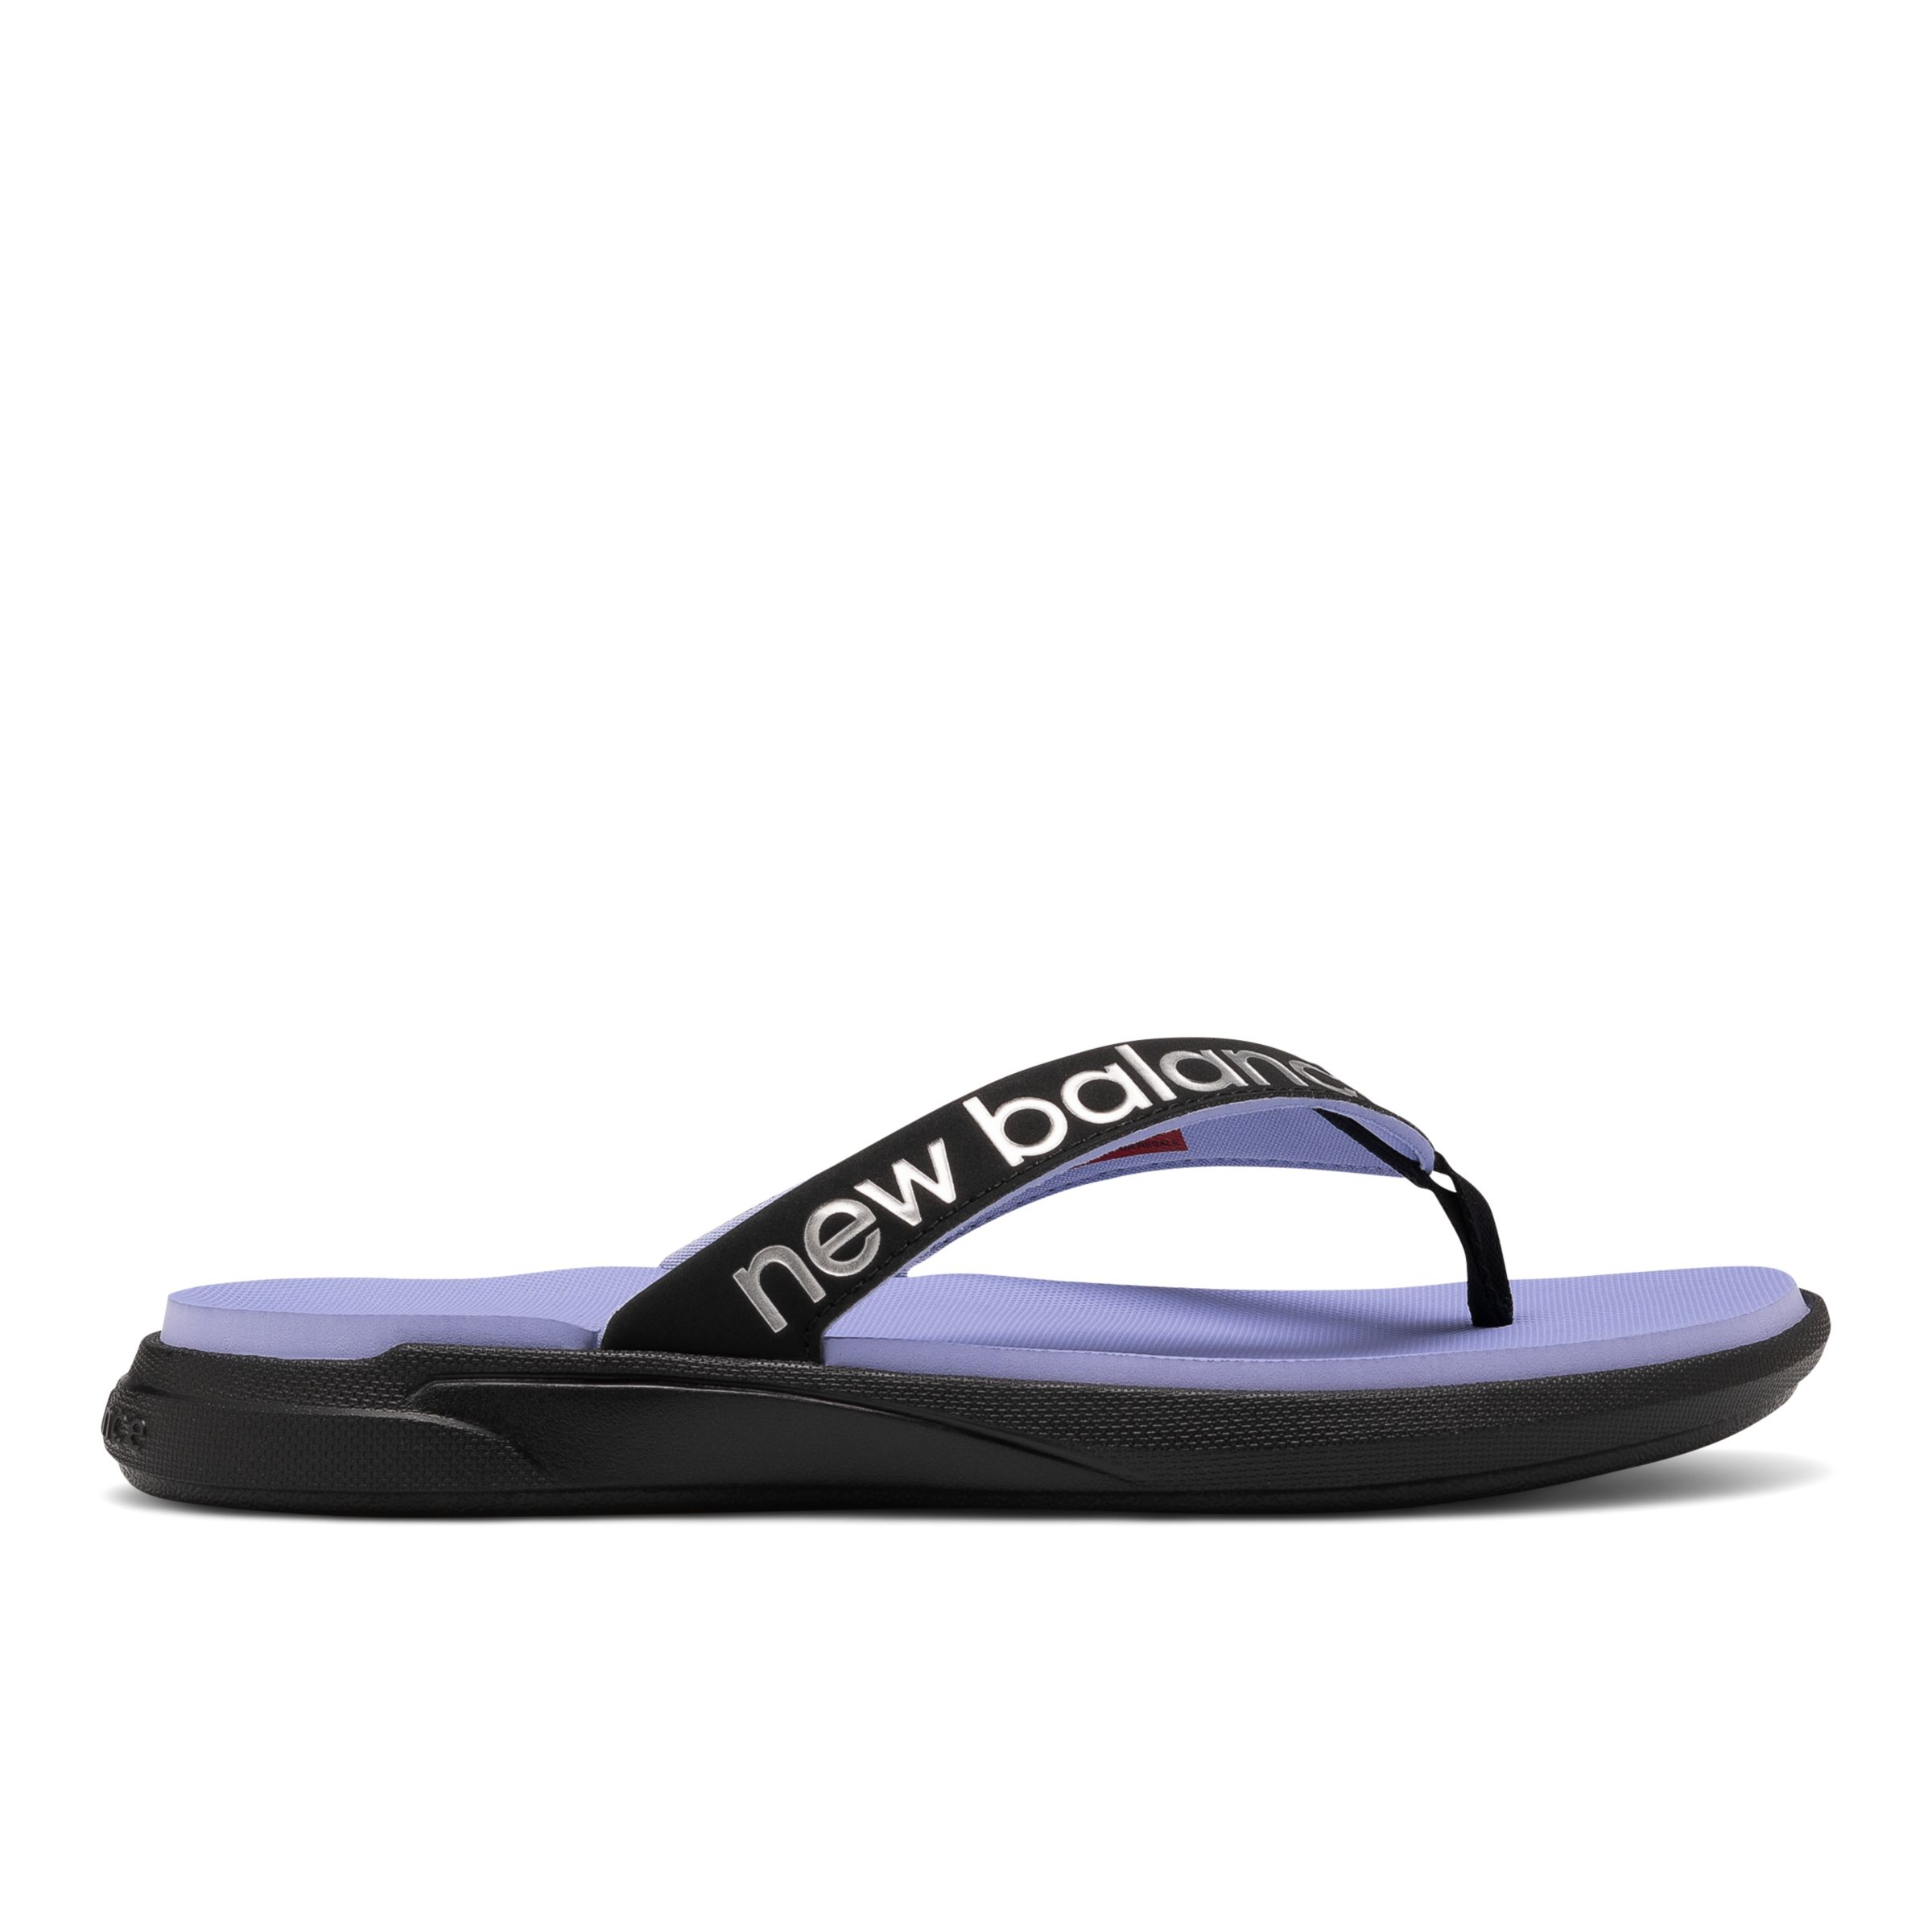 how much is new balance sandals